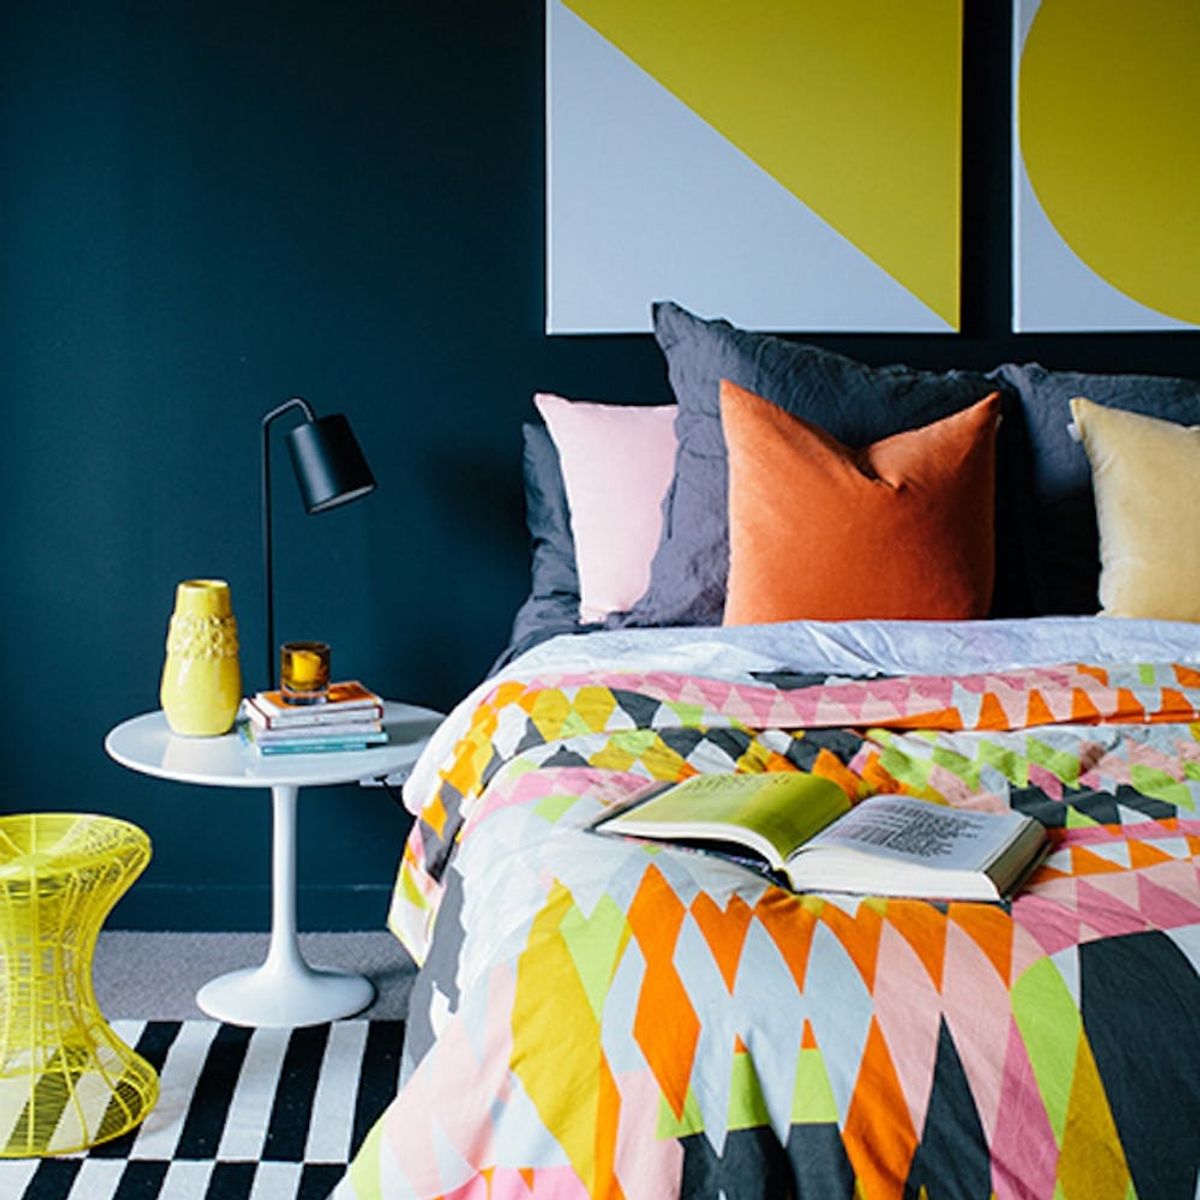 How to Incorporate the Pantone Palette “Graphic Imprints” into Your Home